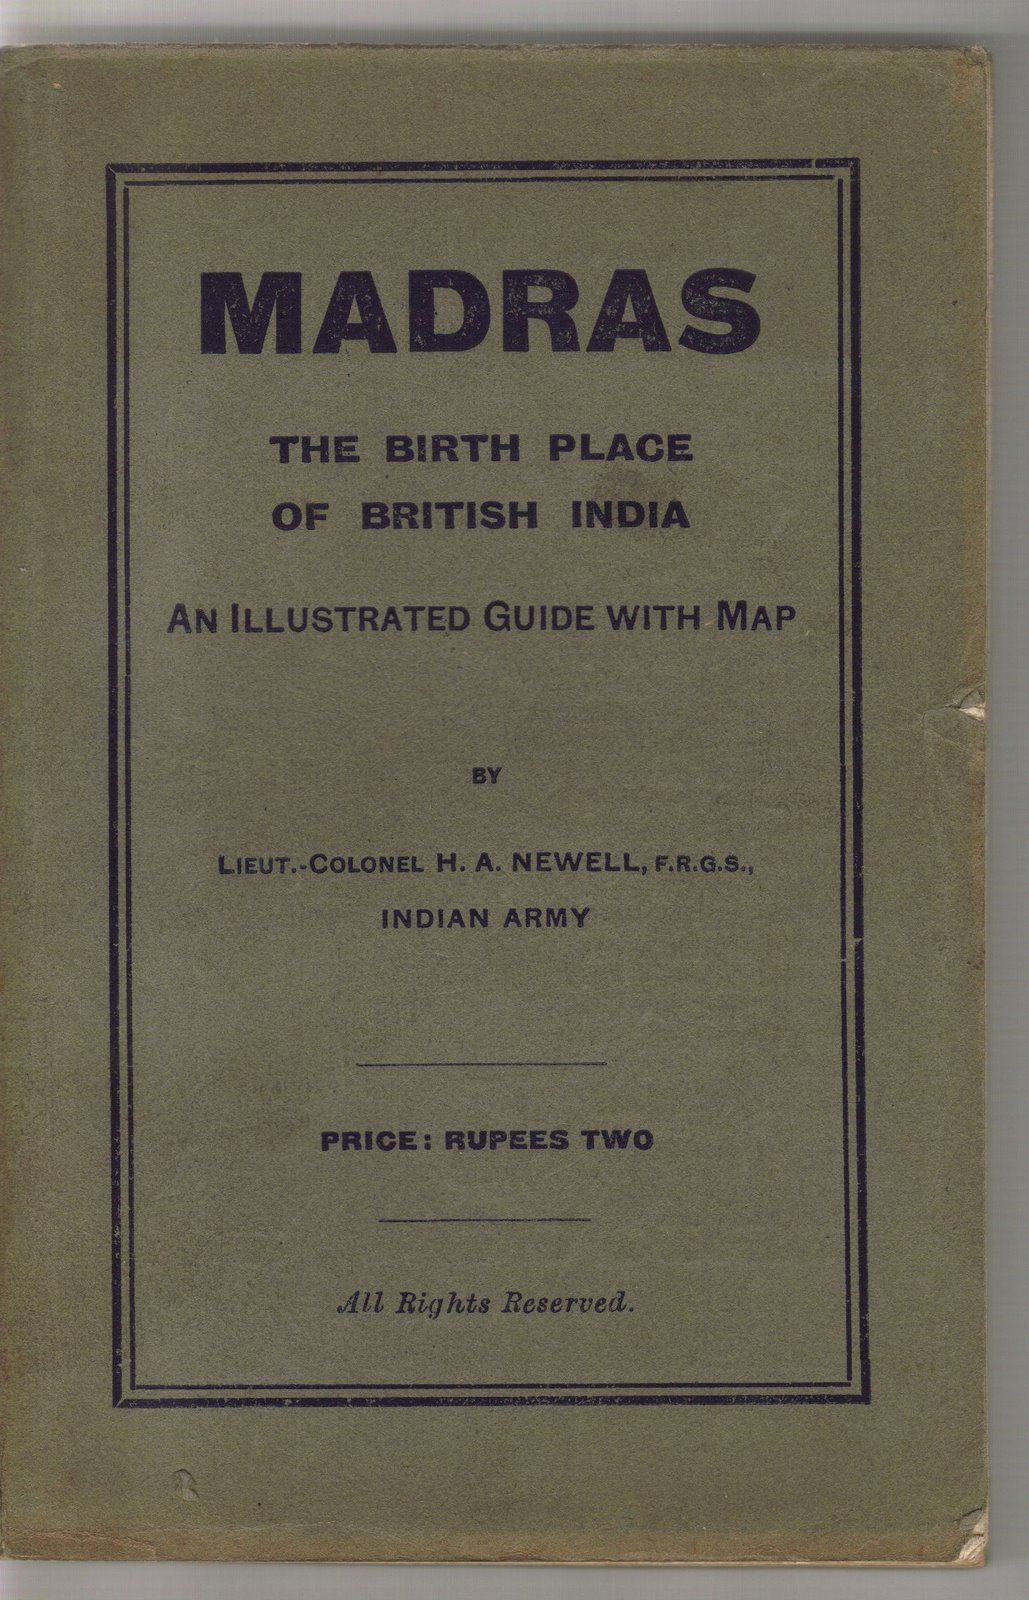 [MADRAS+the+birth+place+of+British+India,pag.+141(Hotel+D]